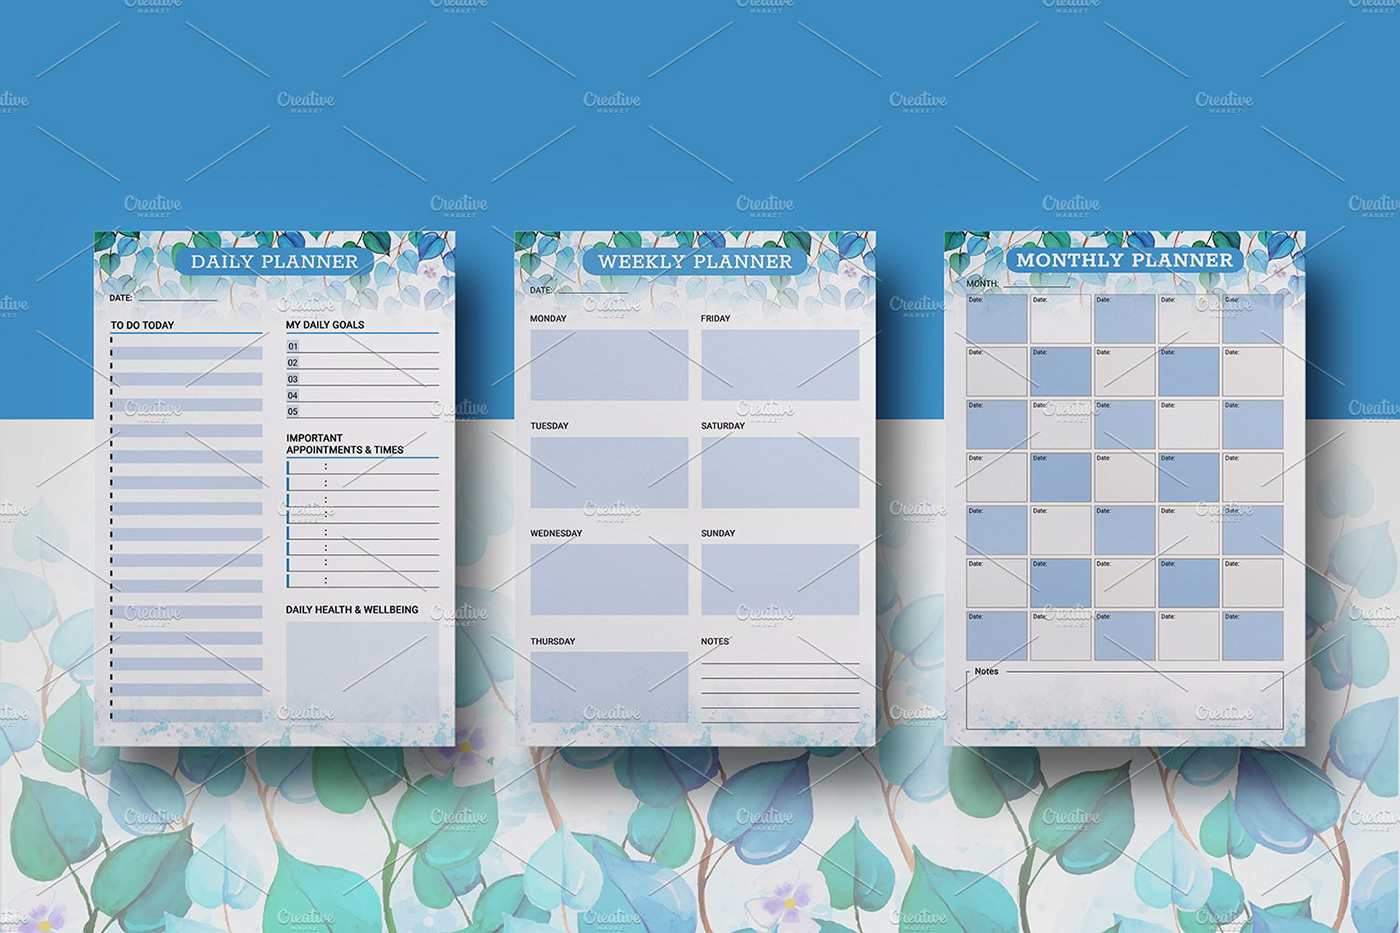 Planner Template Planner Insert daily planner weekly planner monthly planner to do list personal calander happy planner photoshop template ms word